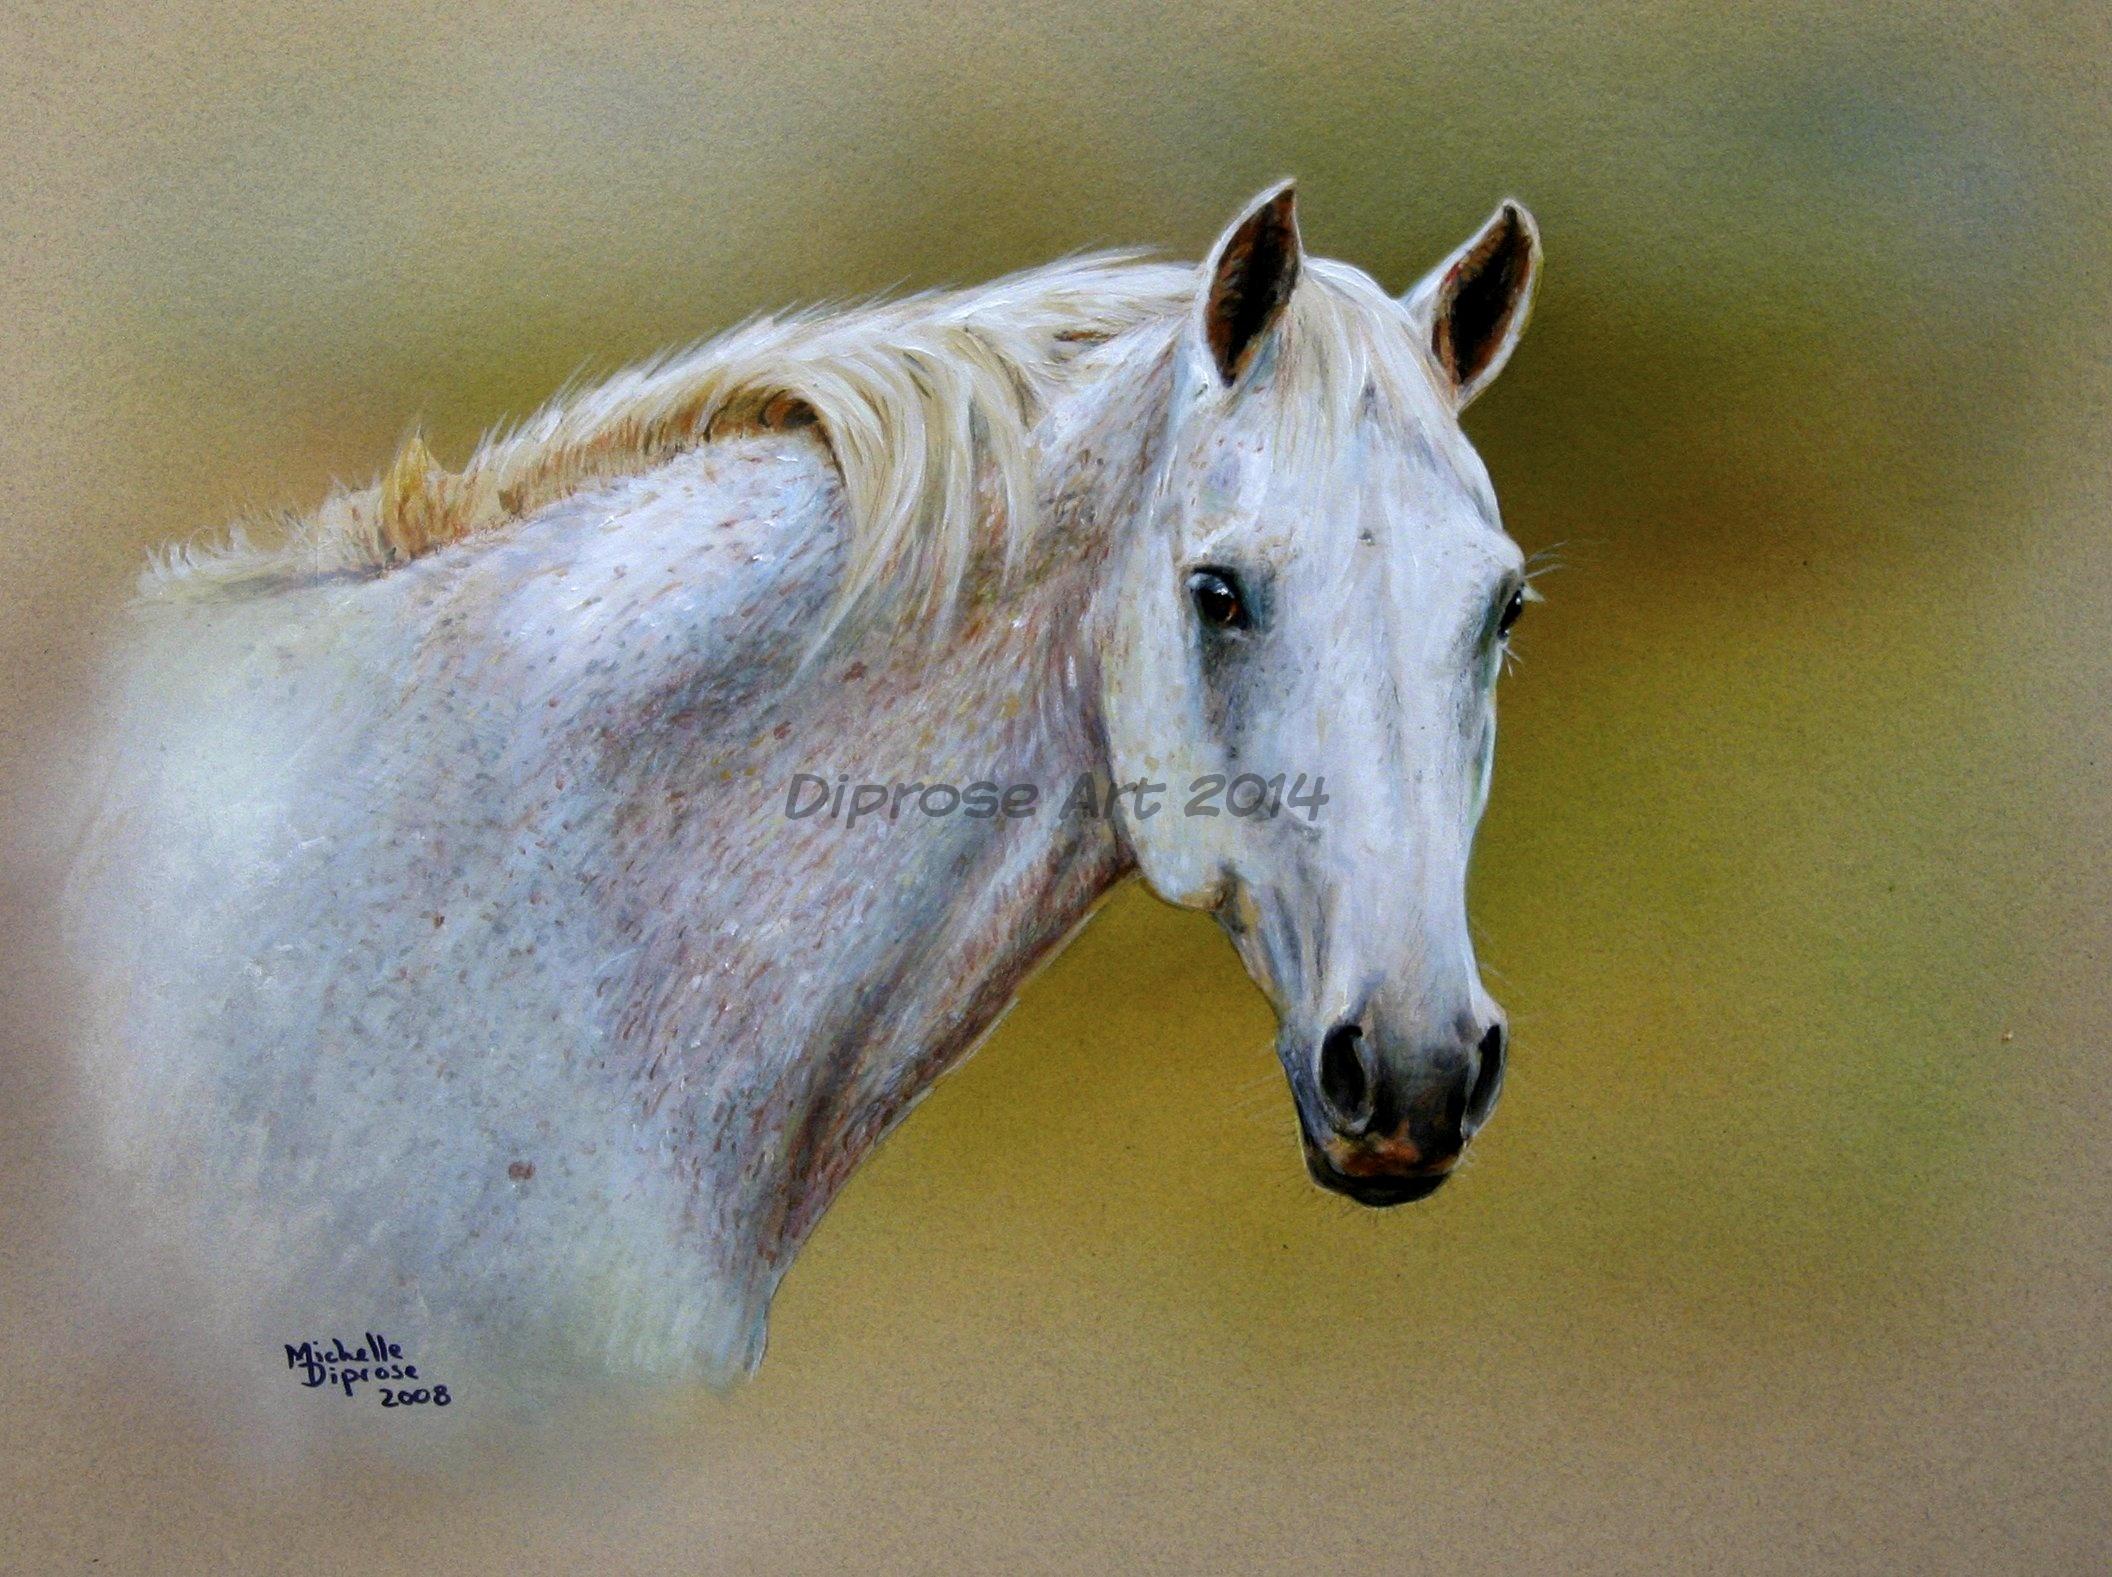 Acrylics on board - approx A3 - horse portrait - Garbo is a flea bitten grey mare (not the easiest to paint!) - I liked this portrait as it looks so natural and relaxed.  She is a beautiful mare and very special.